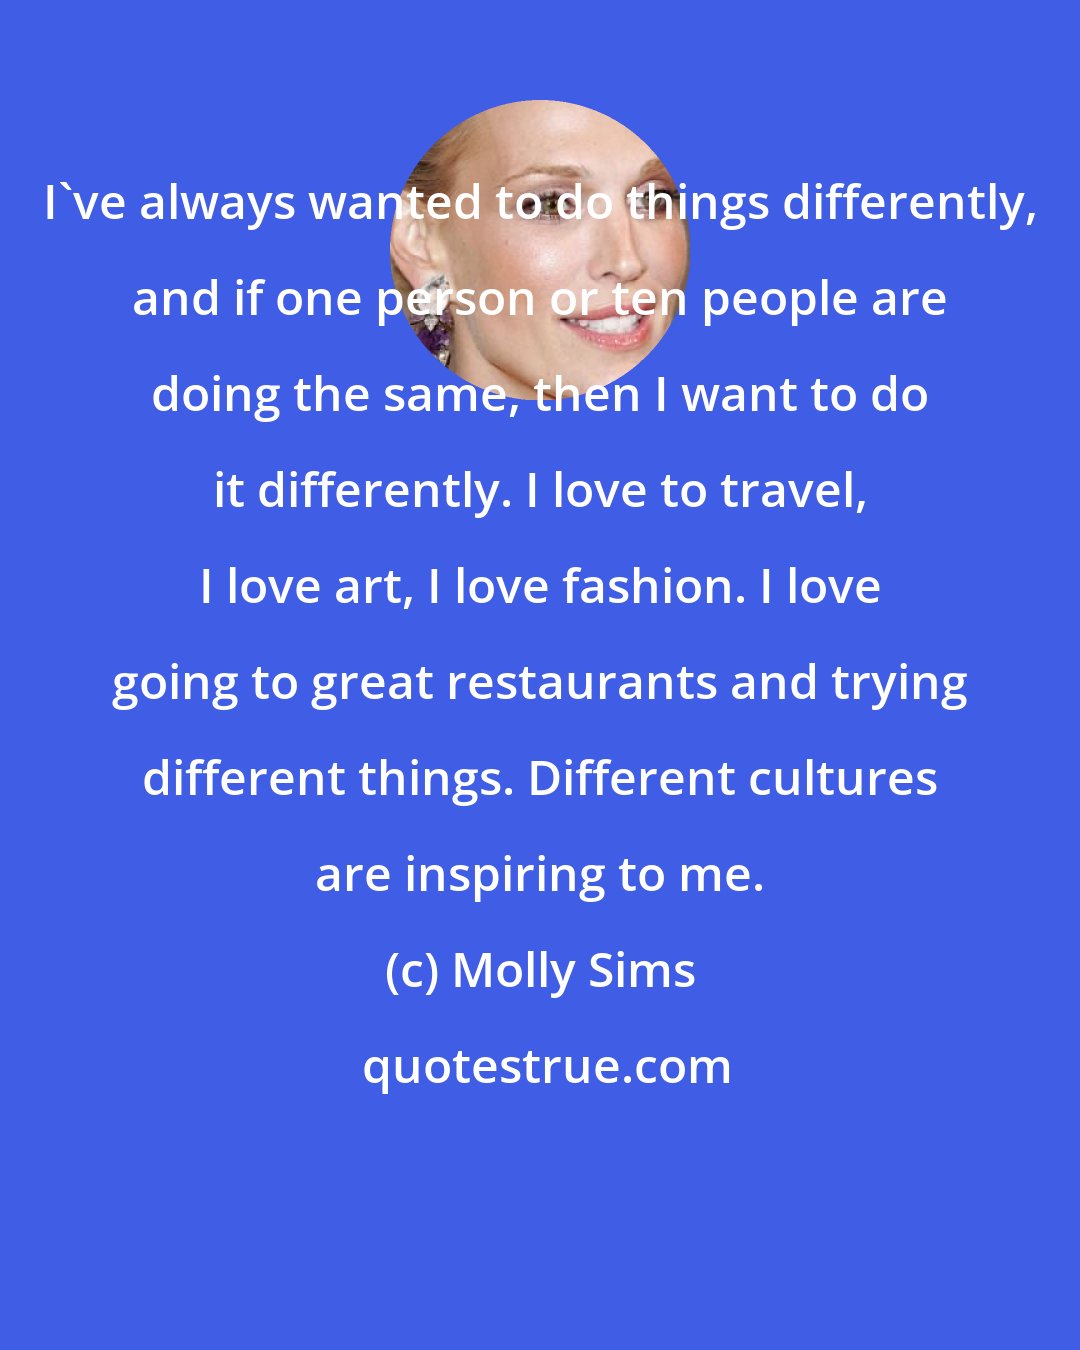 Molly Sims: I've always wanted to do things differently, and if one person or ten people are doing the same, then I want to do it differently. I love to travel, I love art, I love fashion. I love going to great restaurants and trying different things. Different cultures are inspiring to me.